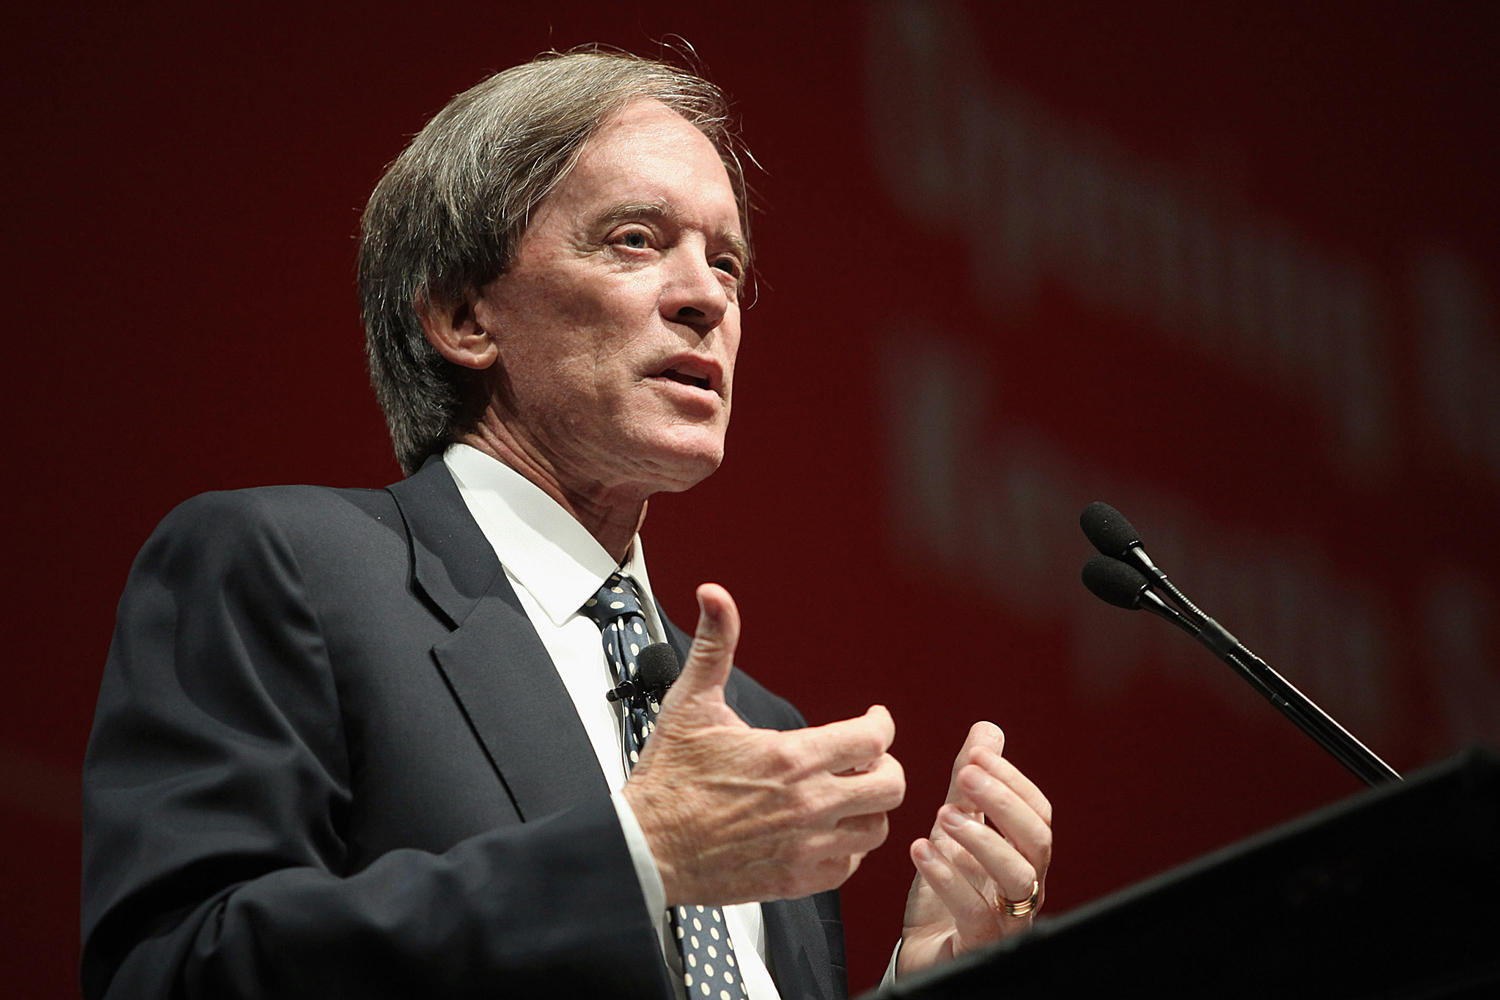 Bill Gross, co-chief investment officer of Pacific Investment Management Co., speaks at the Morningstar Investment Conference in Chicago, Illinois, U.S., on Wednesday, June 8, 2011. (Tim Boyle—Bloomberg/Getty Images)